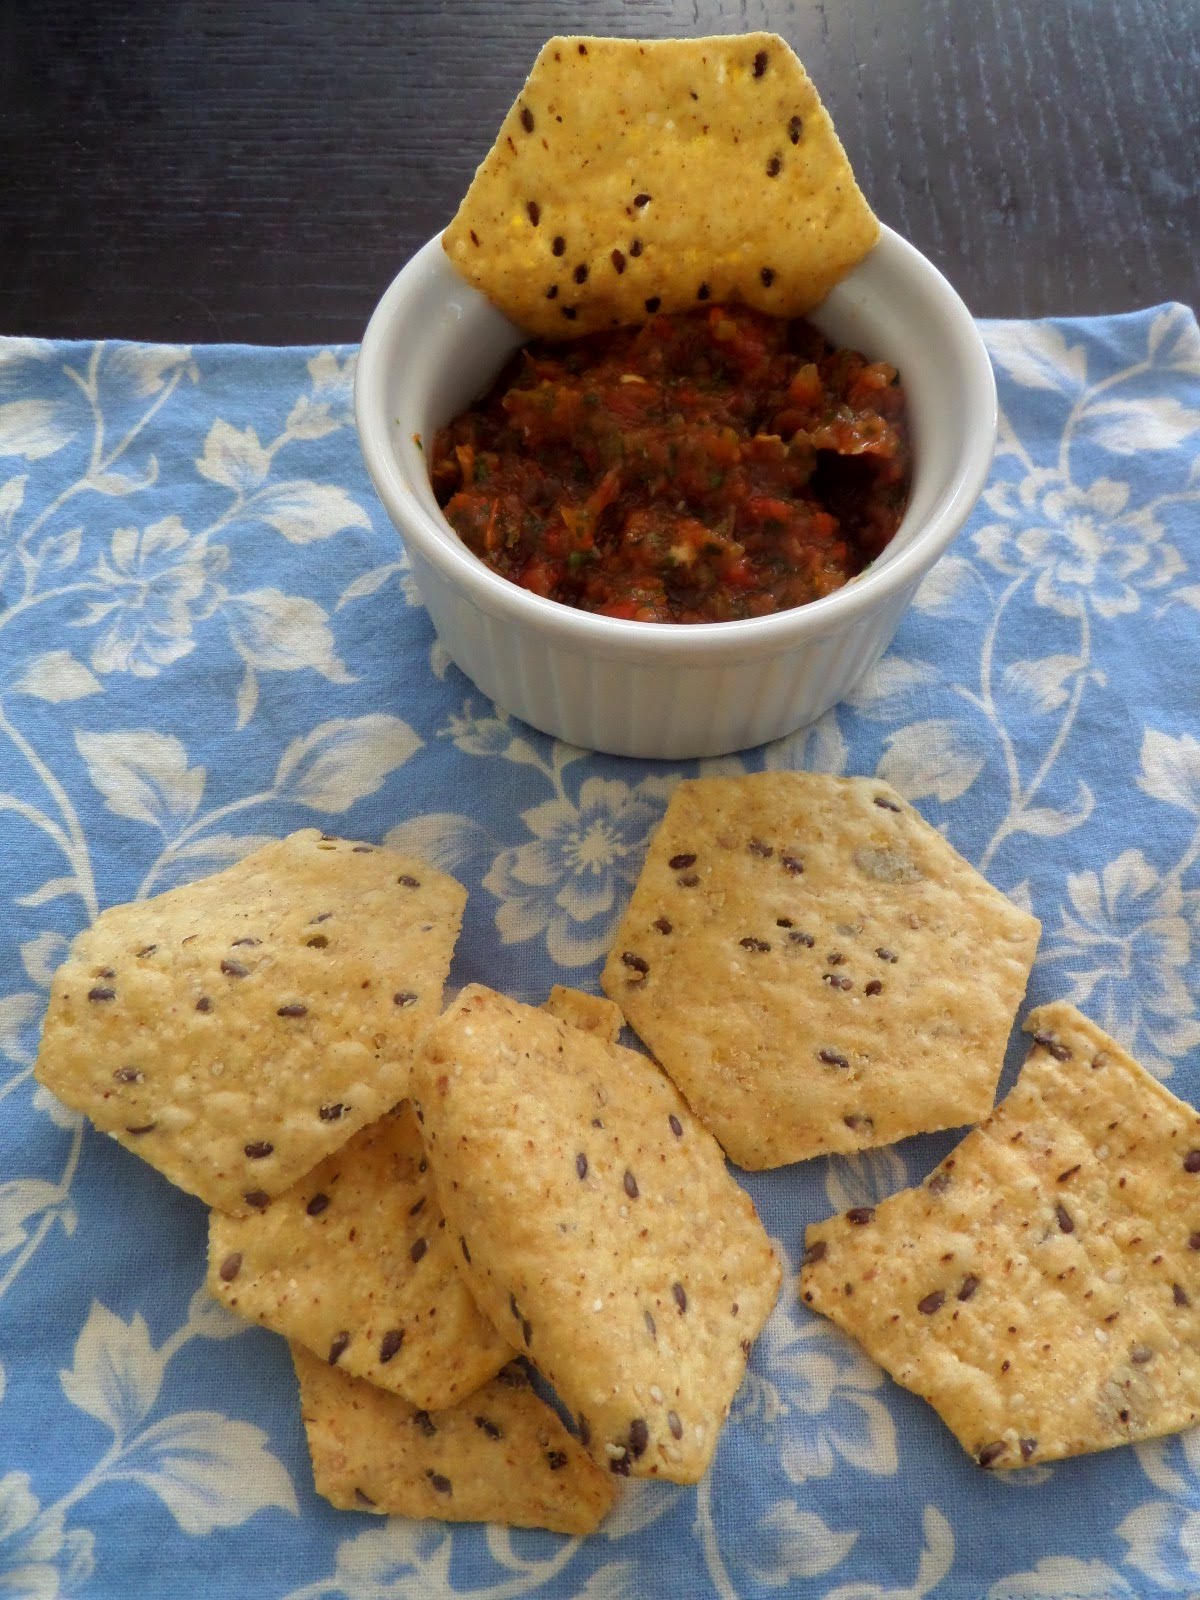 Roasted Pepper Salsa:  A basic salsa amped up with red bell pepper added and a slightly smoky boldness from being roasted.  It makes a great football snack.